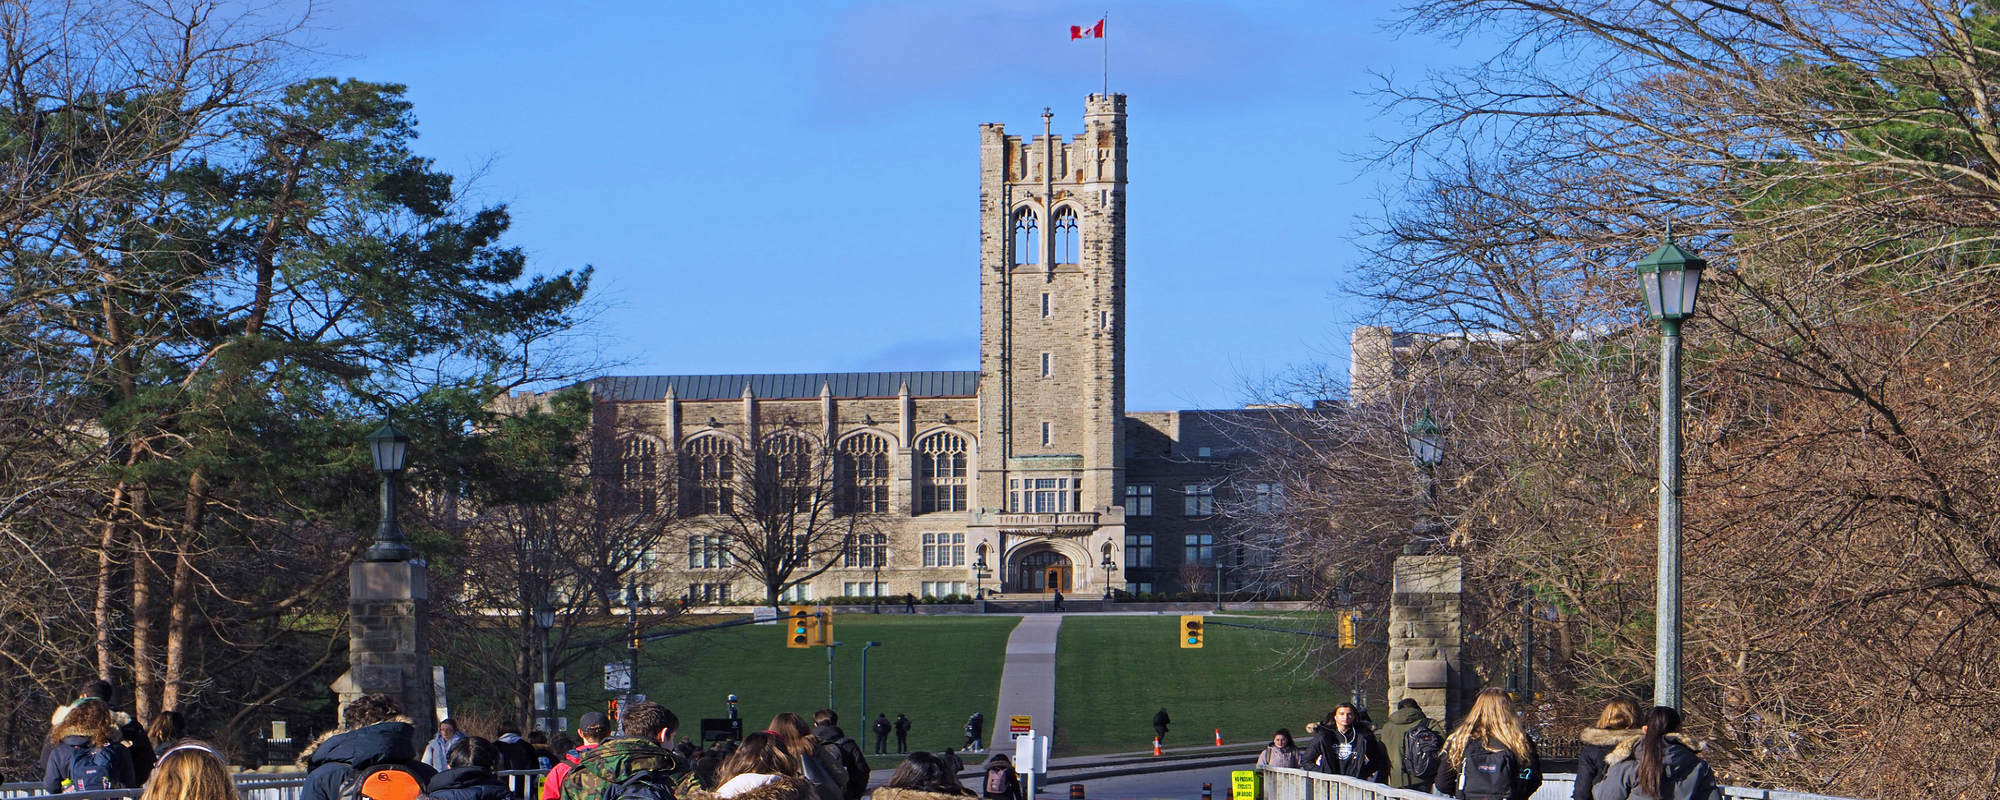 Canadian colleges themed stock - university students at University of Western Ontario walking towards University College building in the horizon.